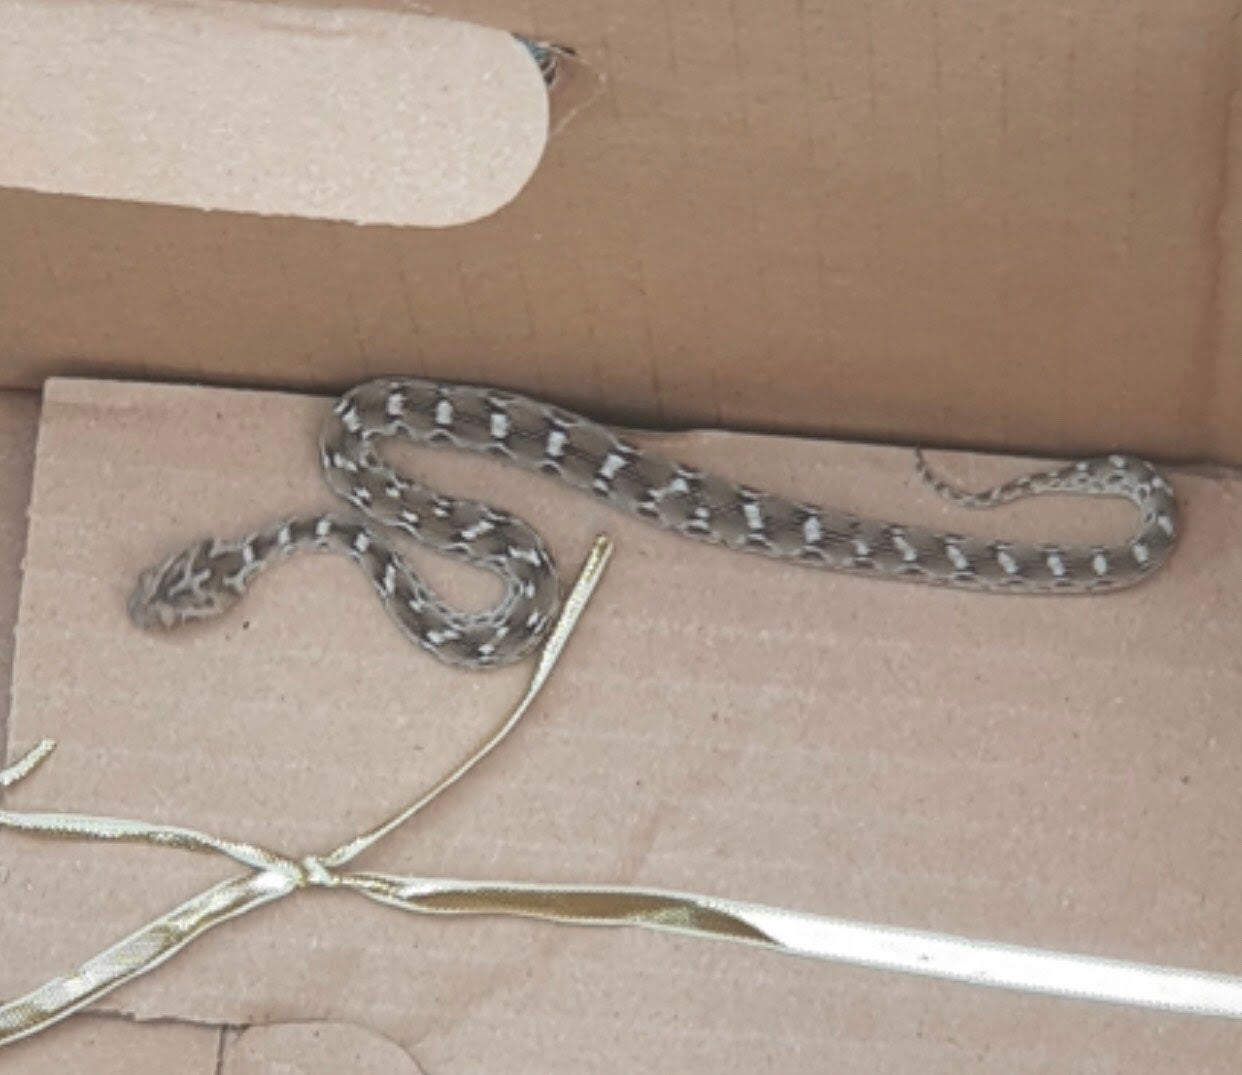 The saw-scaled viper was spotted by staff at a brick firm in Salford (RSPCA)